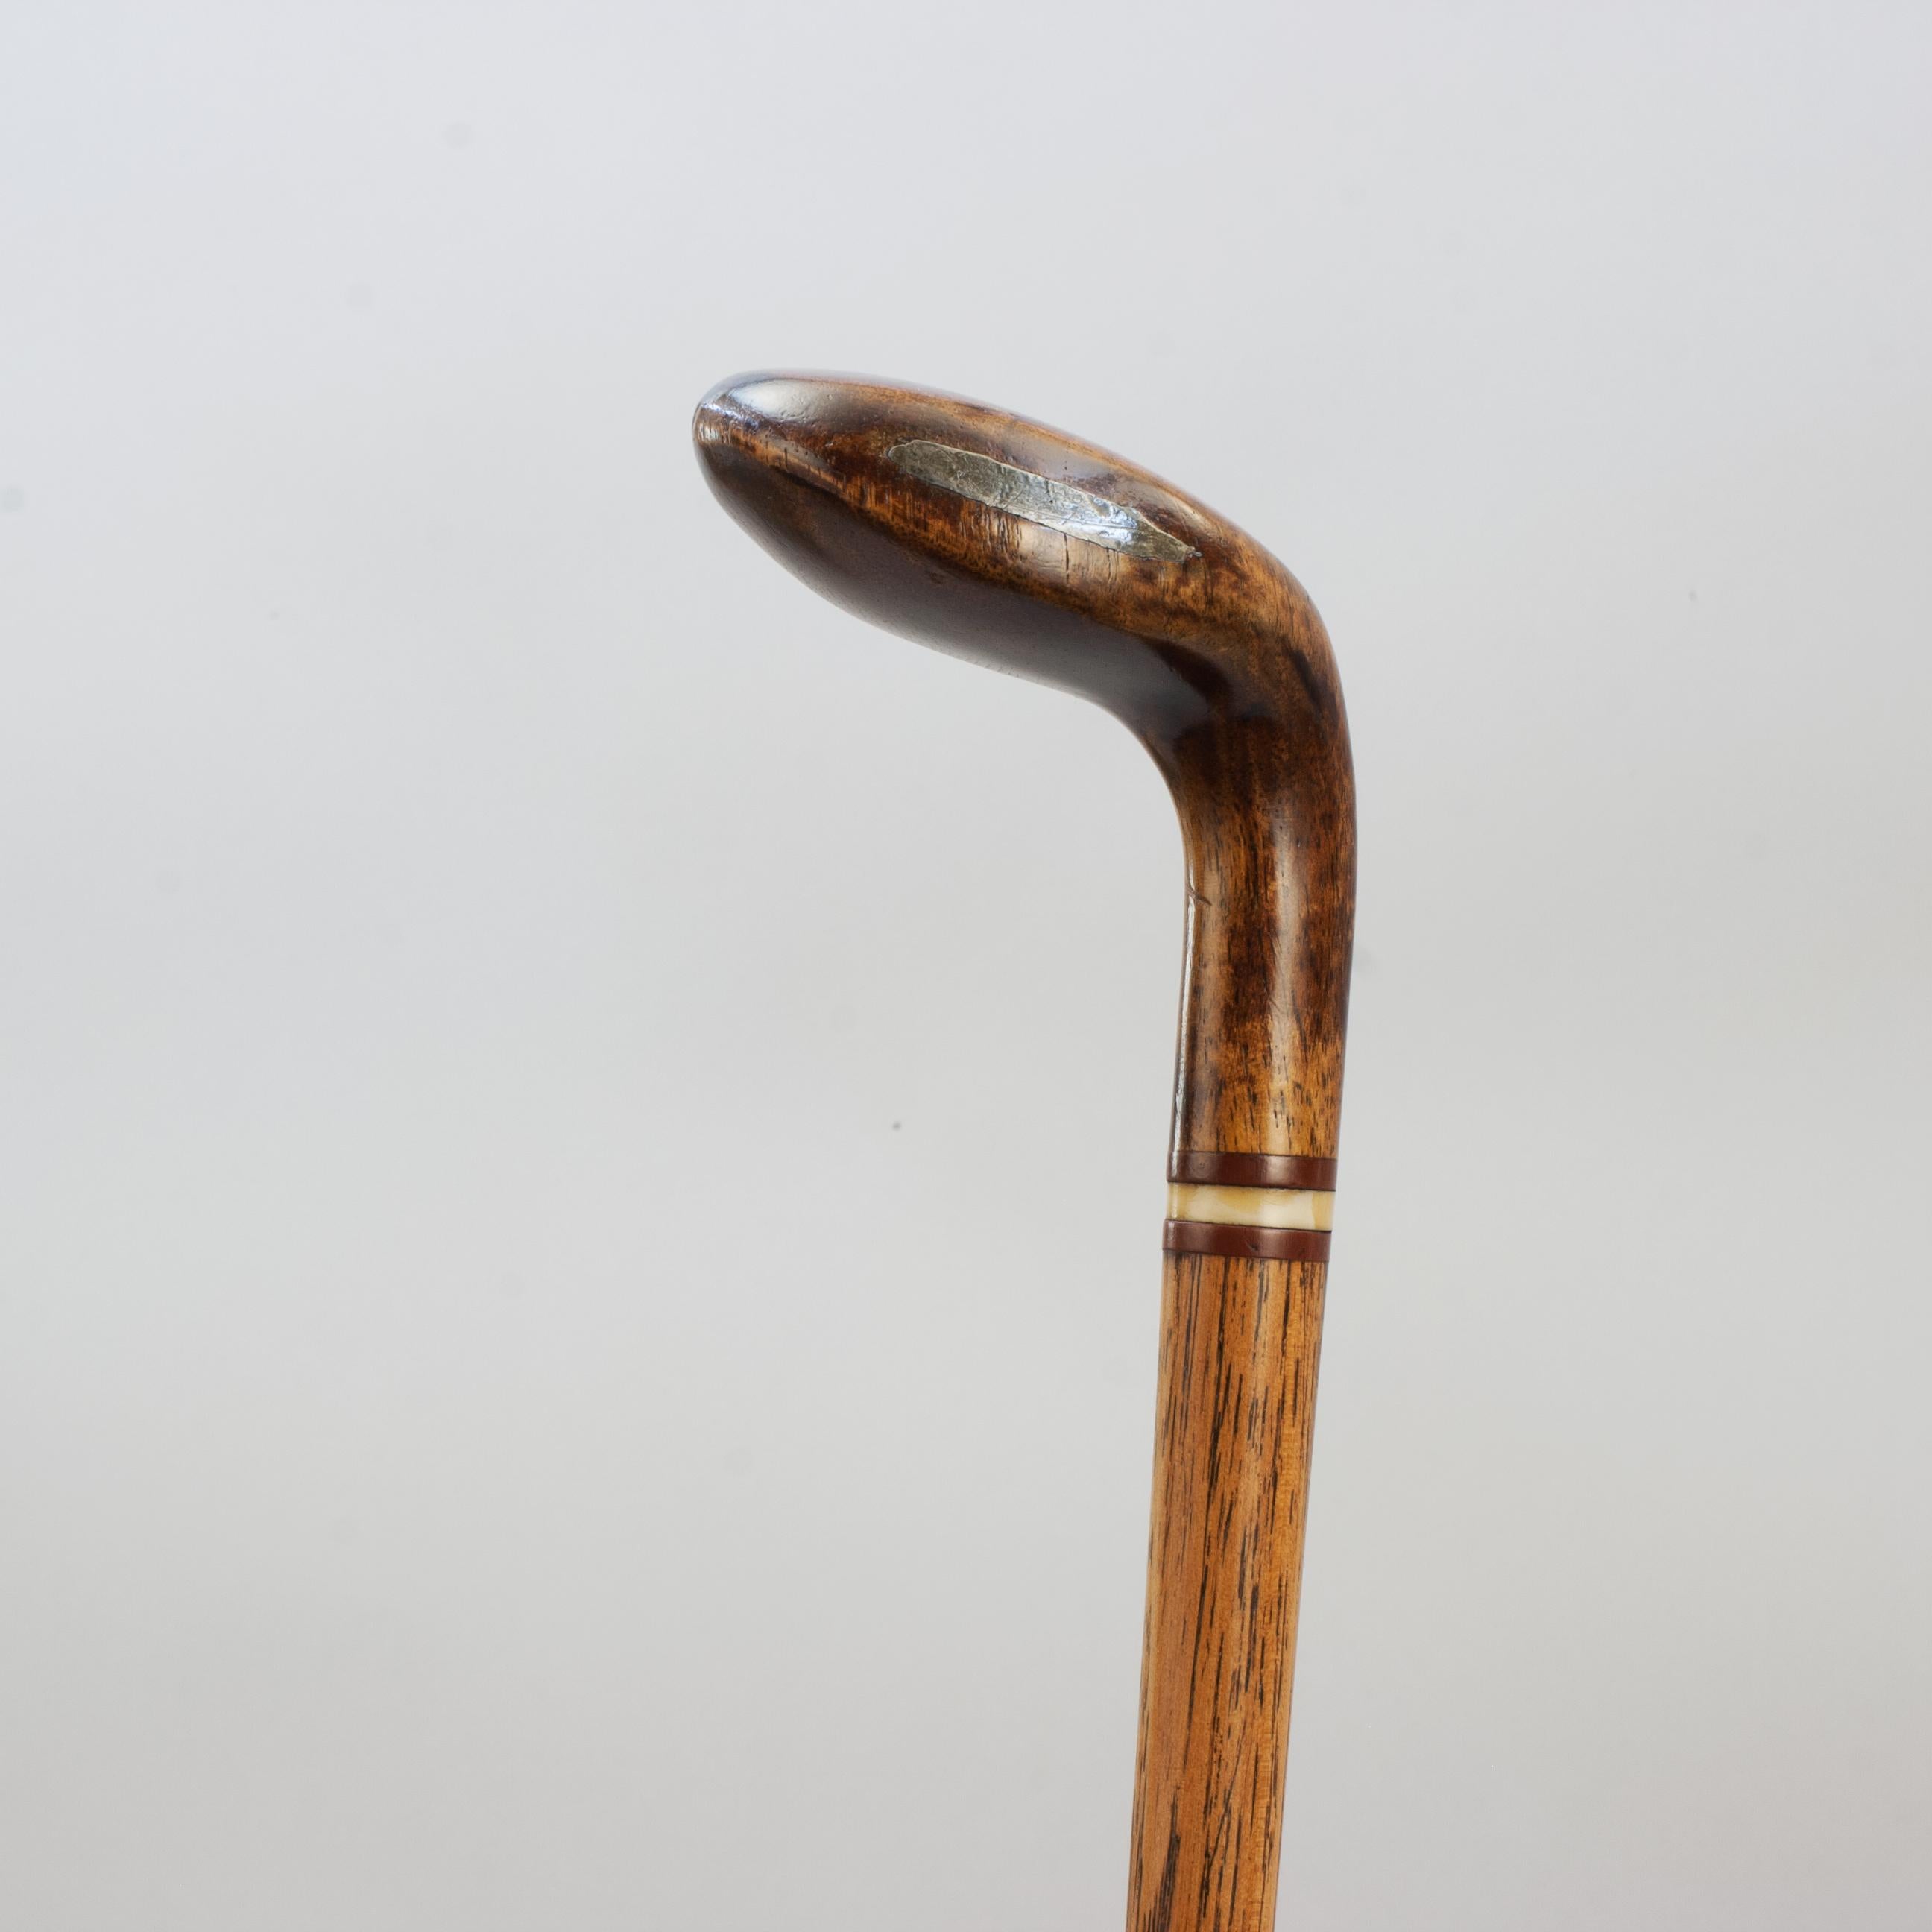 Antique Sunday Club, Golf Club Walking Stick.
A desirable walking cane with the handle in the shape of a golf club head. The gentleman's walking stick has a persimmon socket head handle with a curved soled with pegged horn insert, face insert with